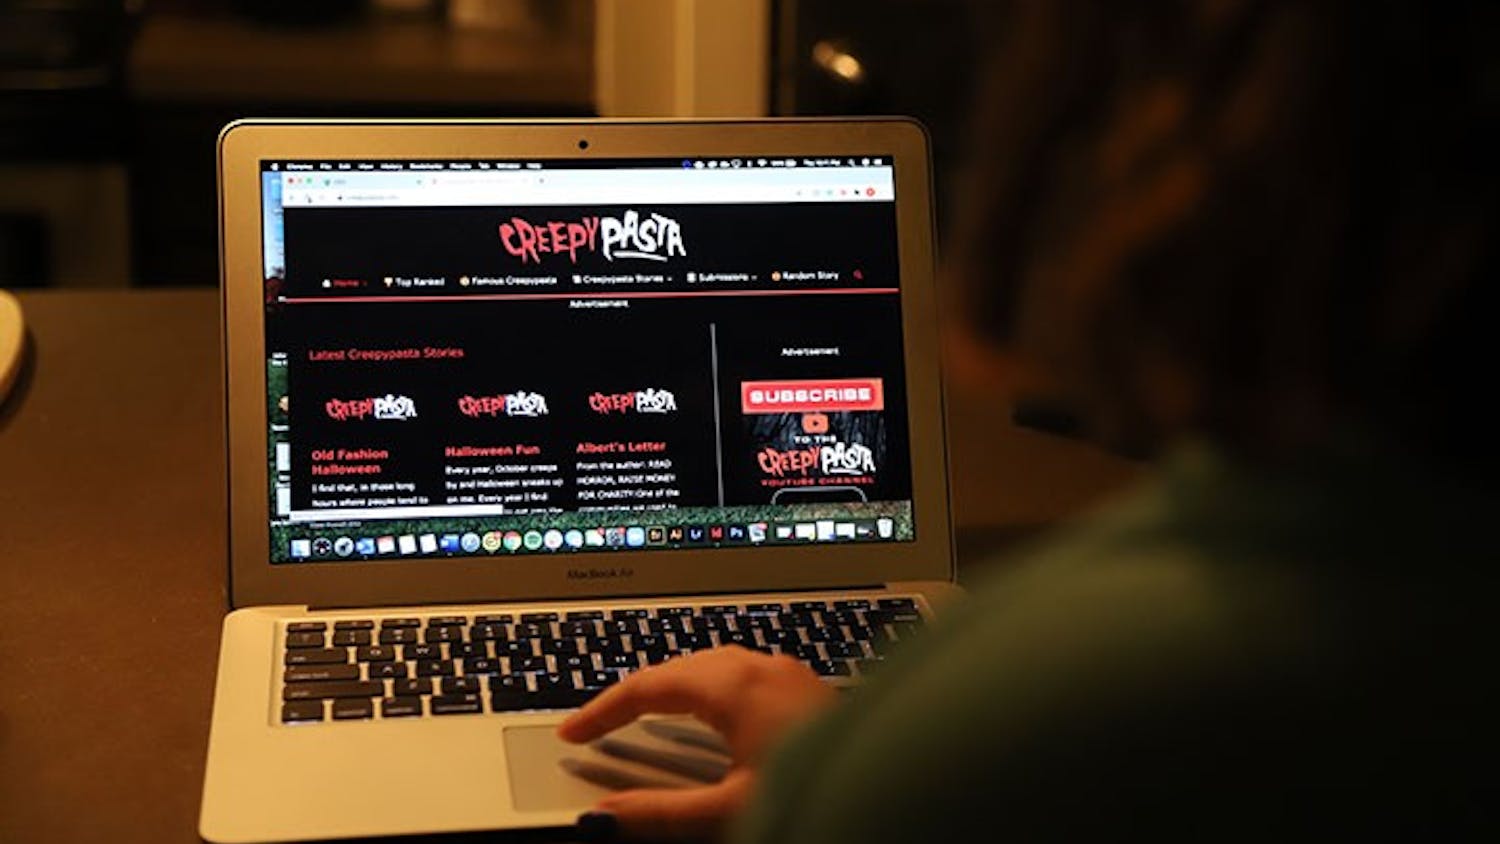  A person at a computer while it is displaying the Creepypasta website. Creepypasta is a horror story website where writers can post stories and receive feedback from their audience.